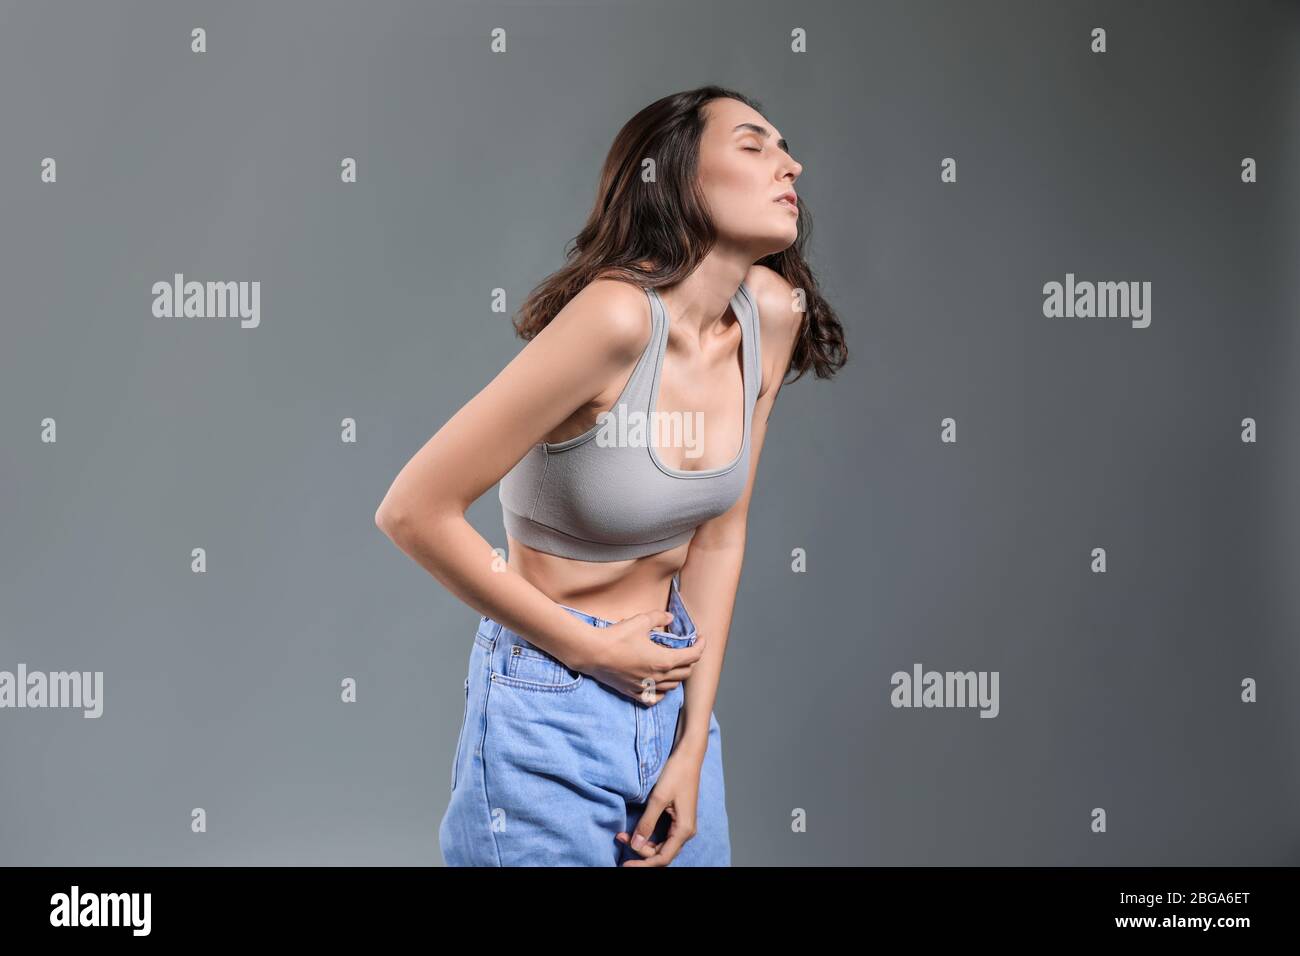 Young woman with anorexia on grey background Stock Photo